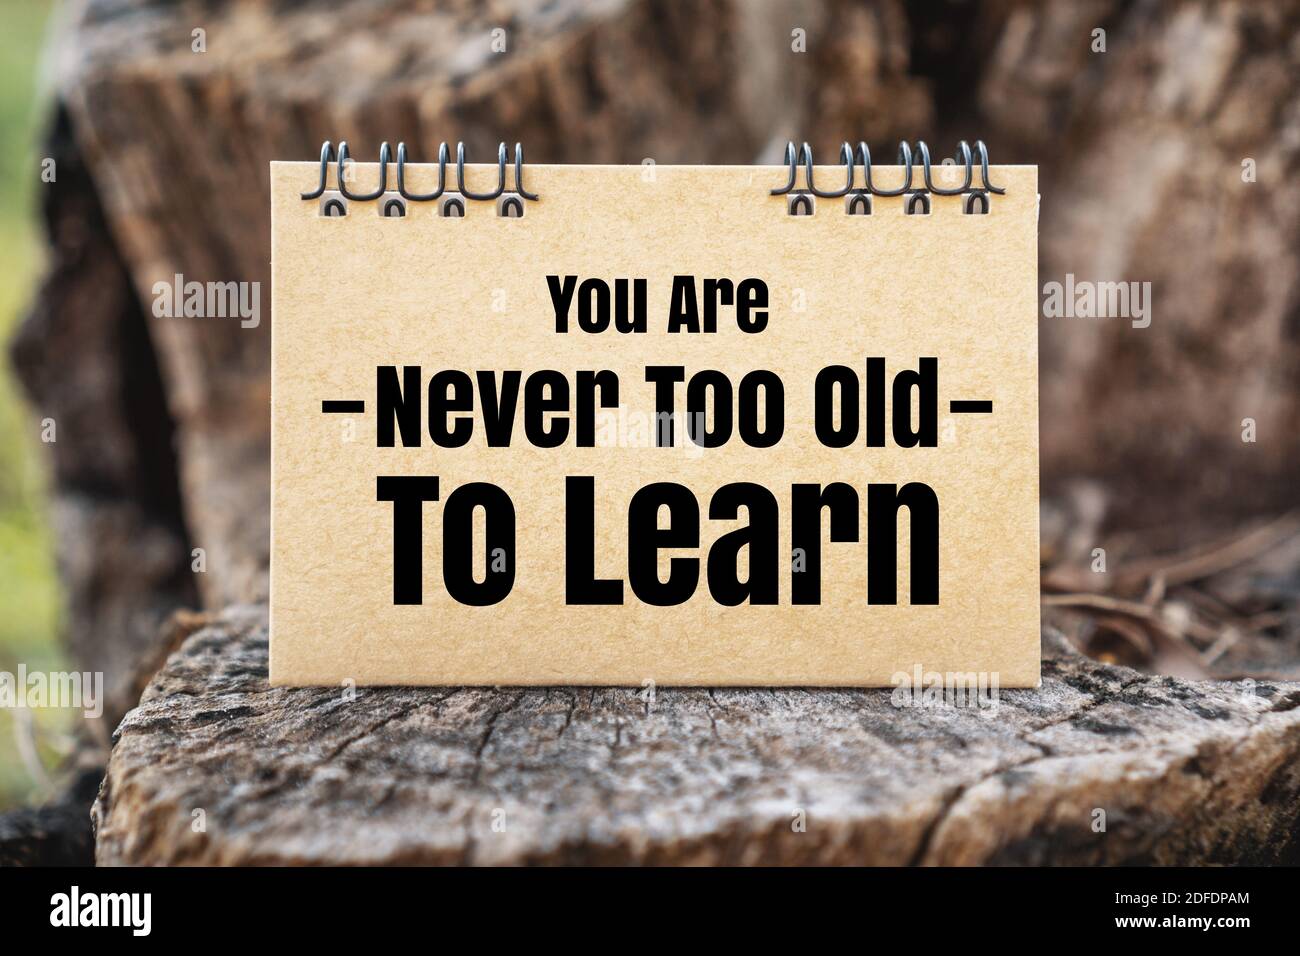 It was never too late to learn something. The past is